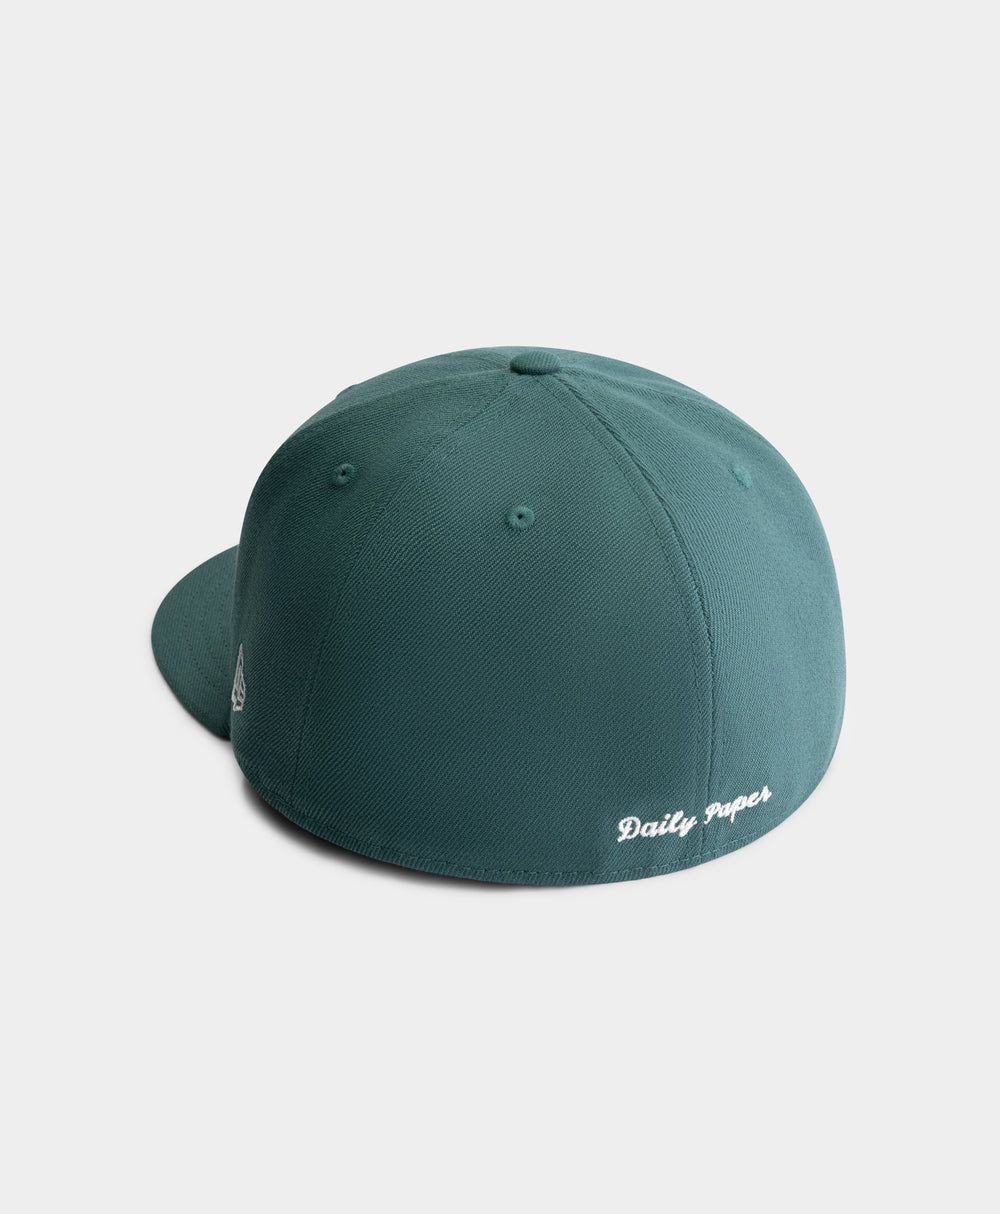 DP - Pine Green Daily Paper x New Era 59FIFTY Fitted Cap - Packshot - Rear